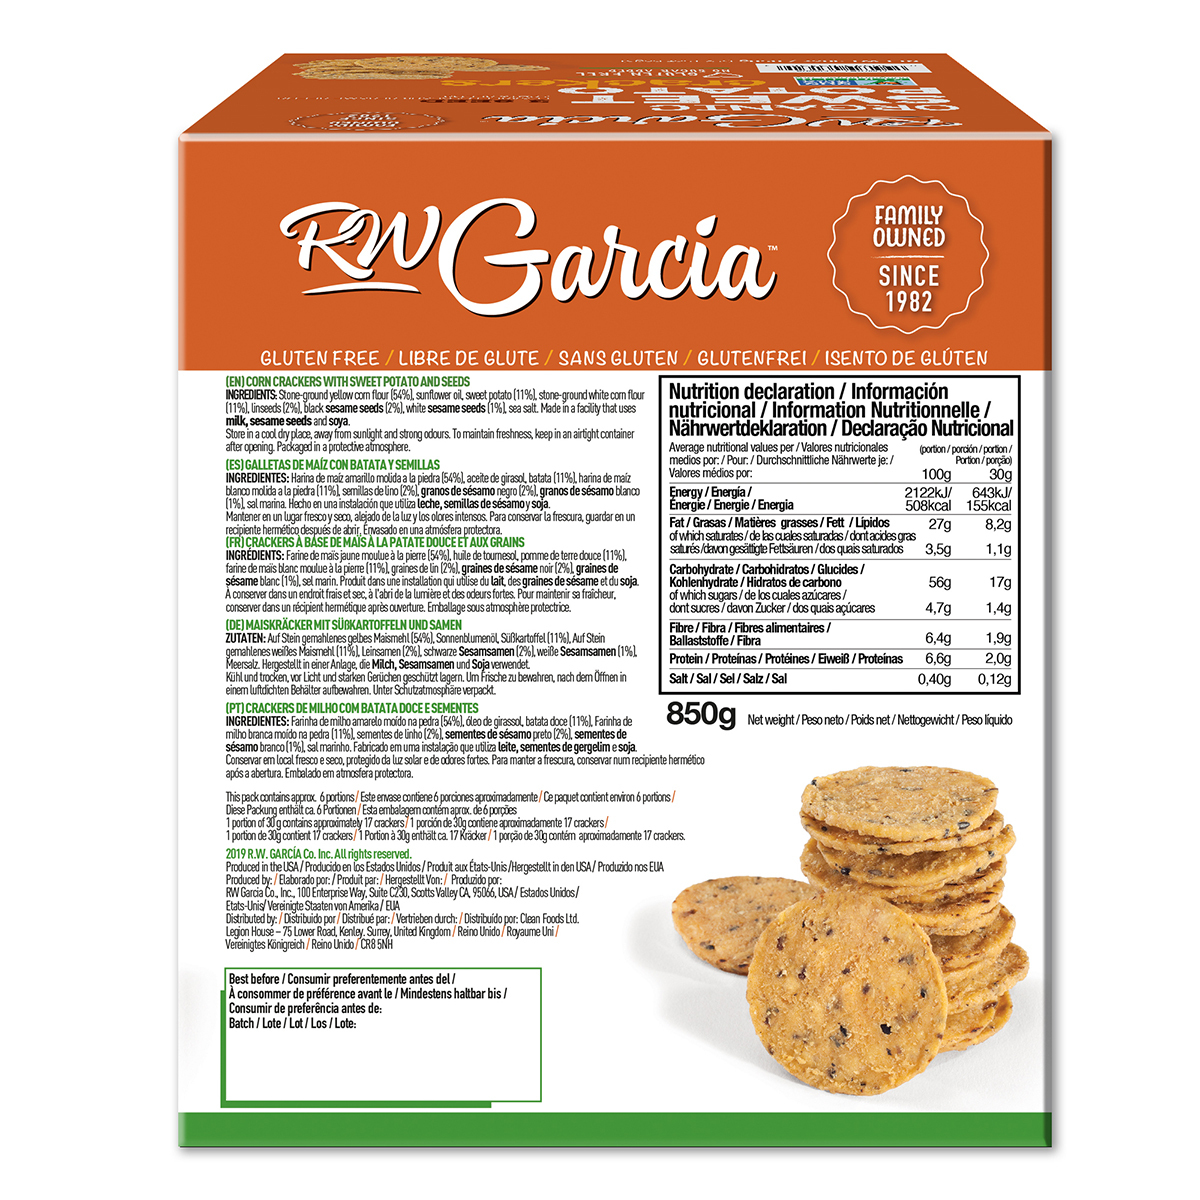 RW Garcia 3 Seed Sweet Potato Crackers, 850g Back of Pack Label